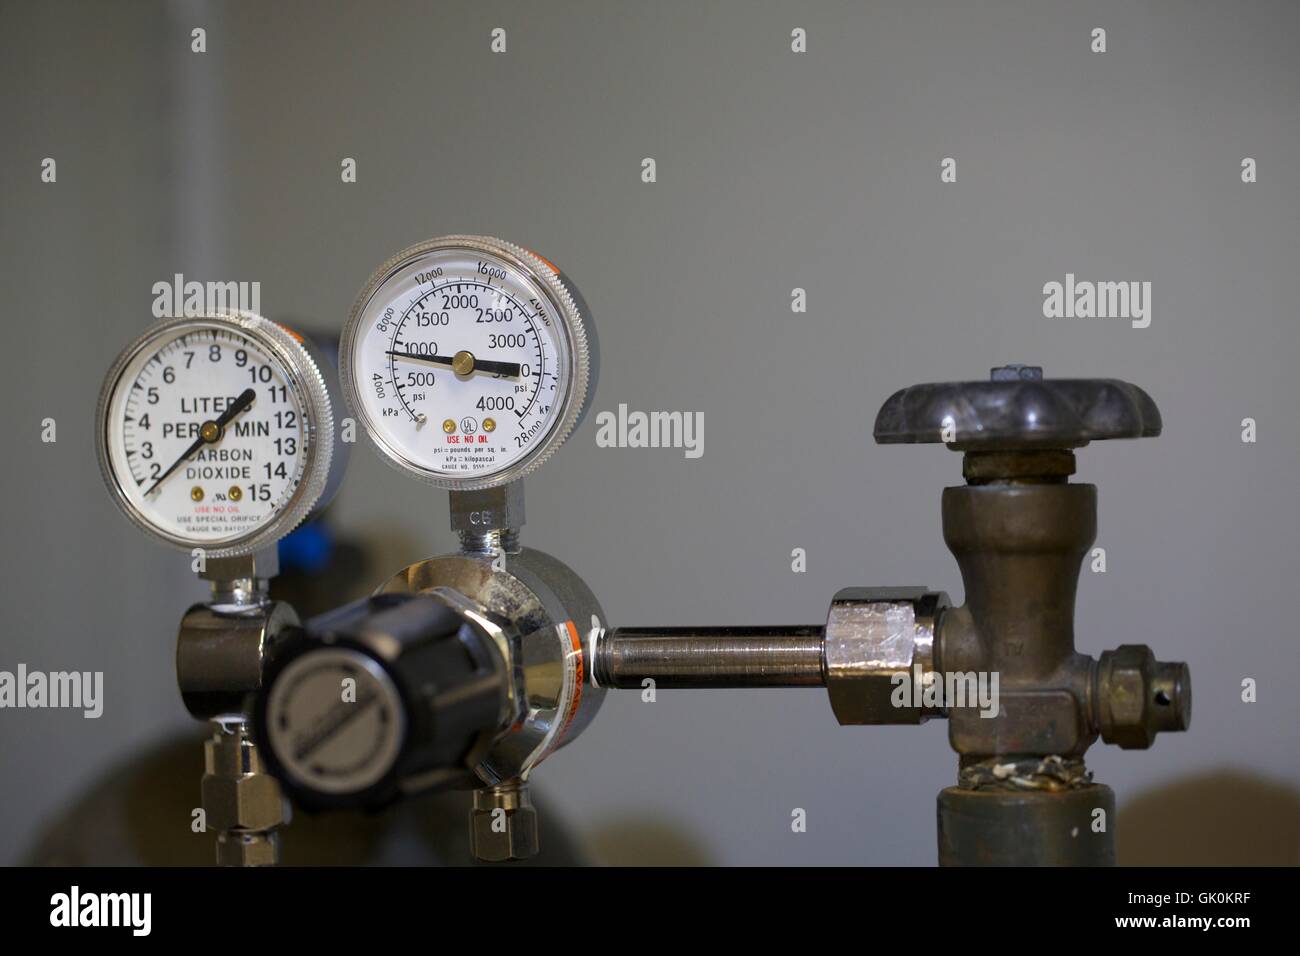 Pressure gauge and valve on carbon dioxide tank. Stock Photo